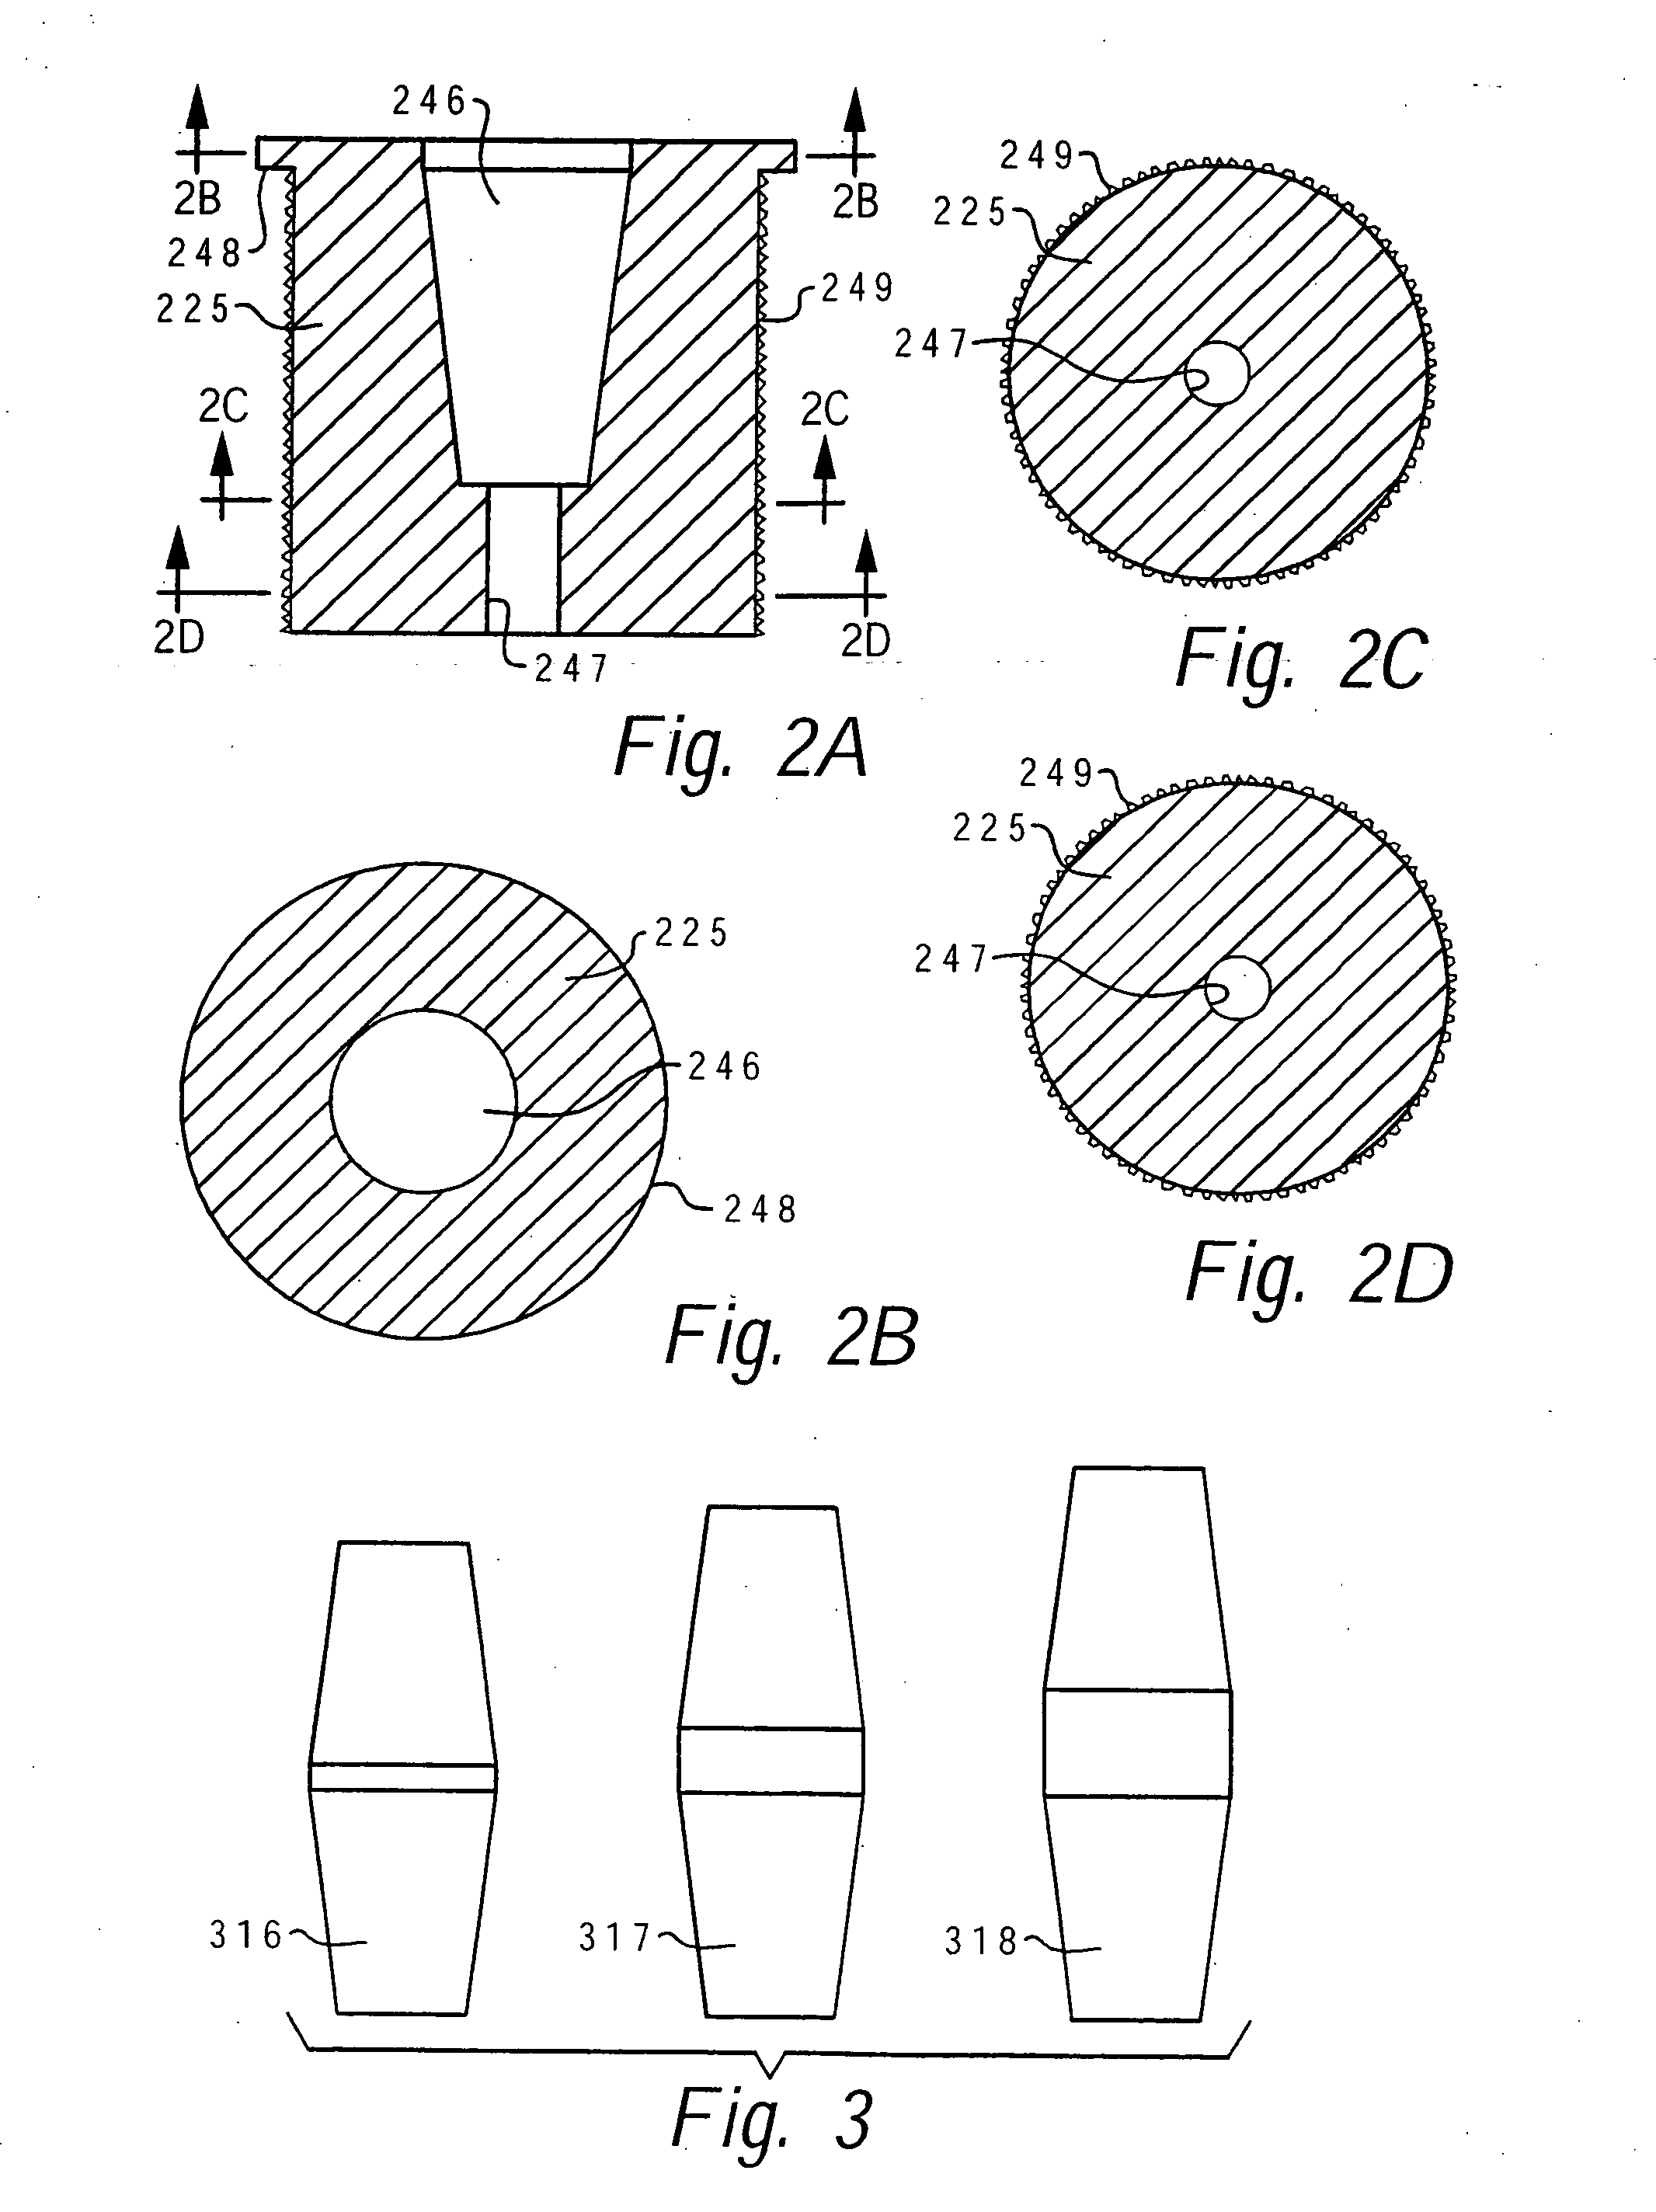 Method of implanting a femoral neck fixation prosthesis